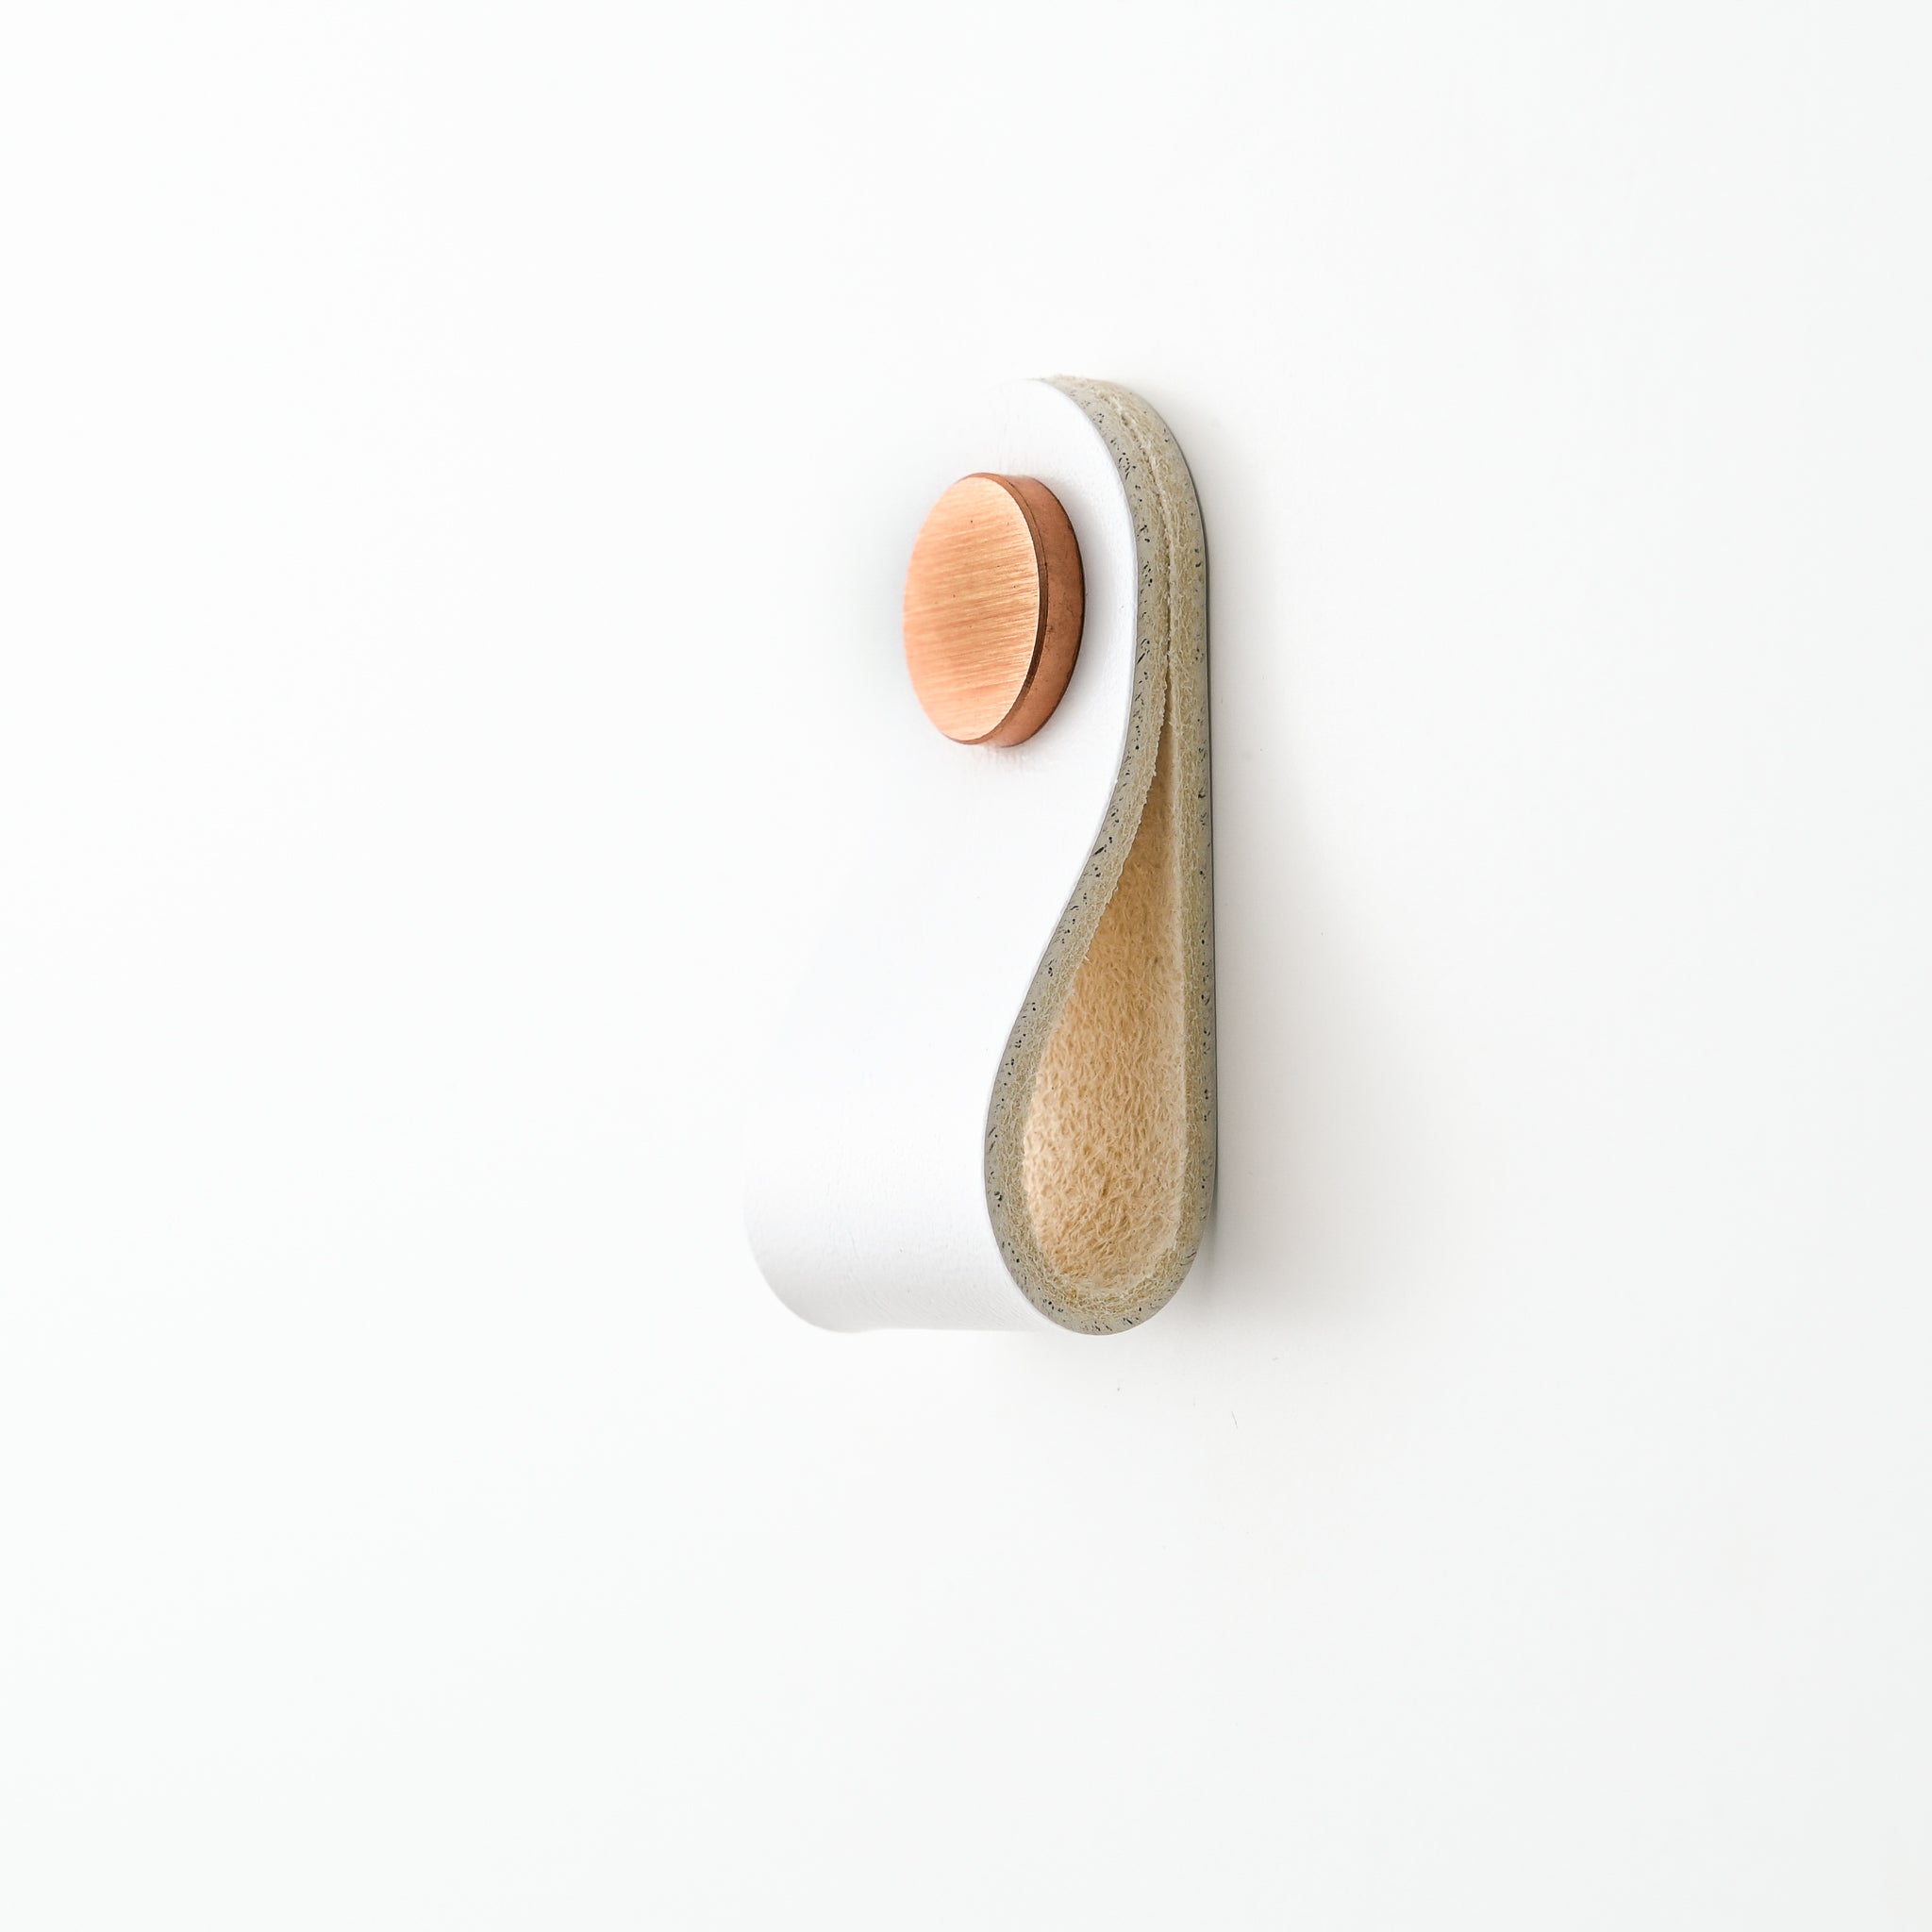 white thin small rounded leather drawer pulls, leather cabinet pulls, leather pulls, Ledergriffe, poignees cuir